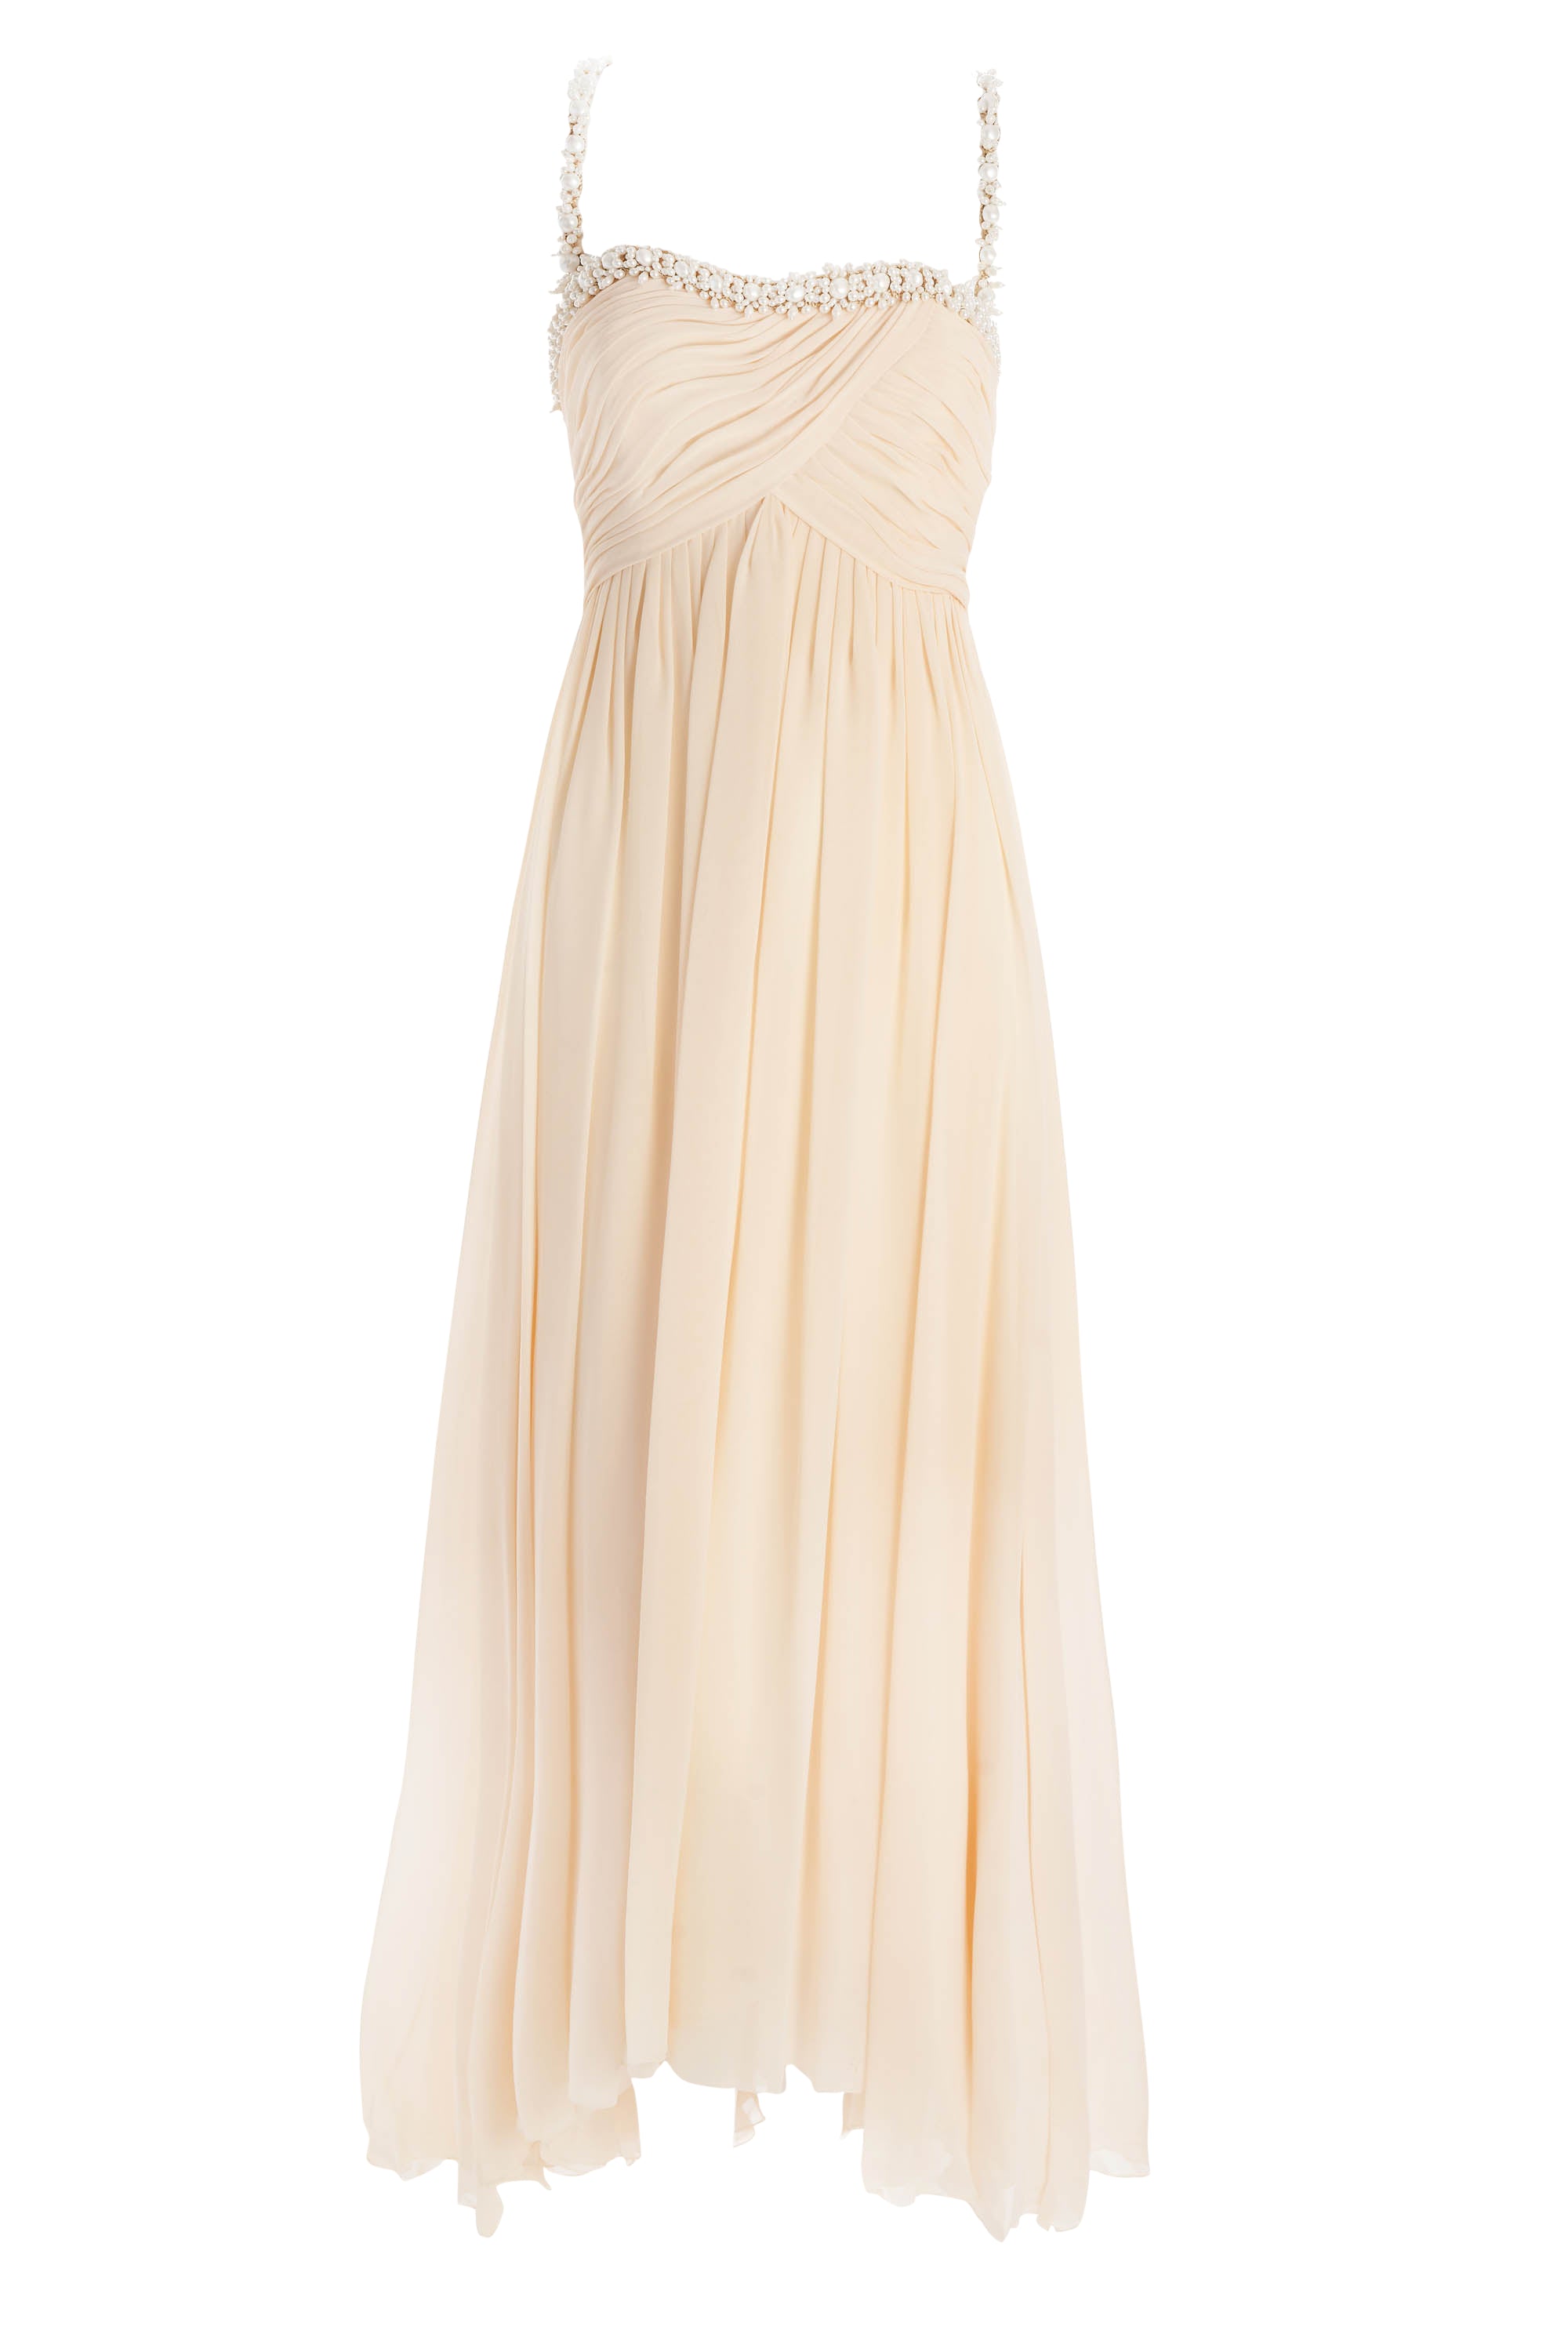 Chanel Ivory Chiffon Gown With Pearl Embellishments Size 38